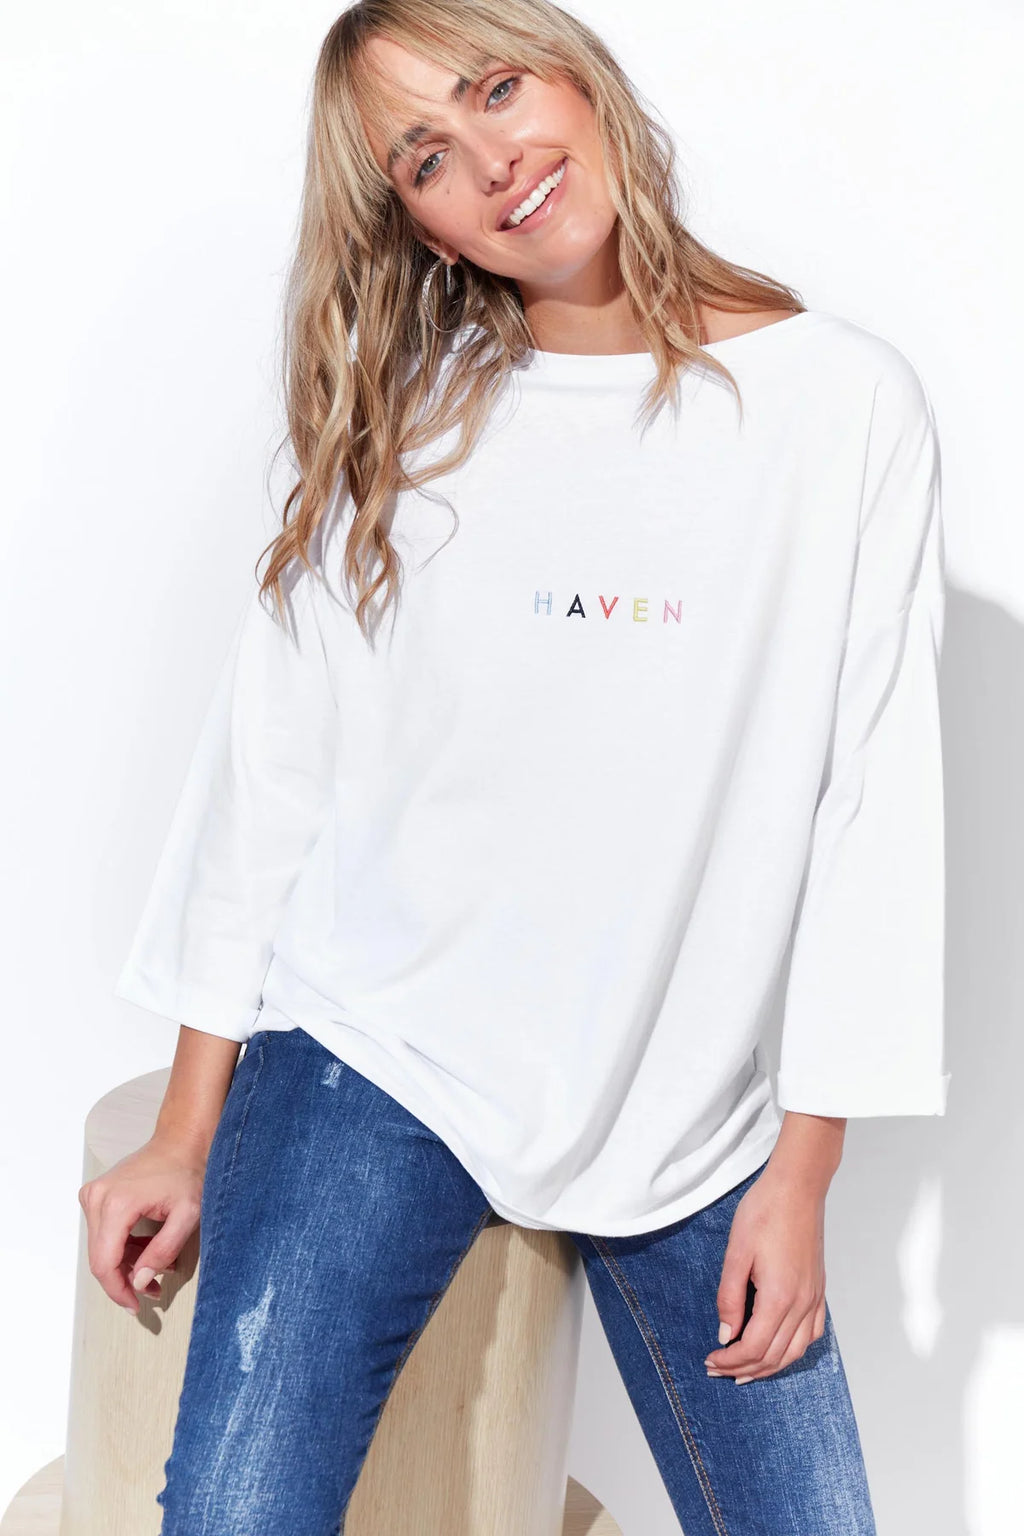 Haven Relax Tee Shirt